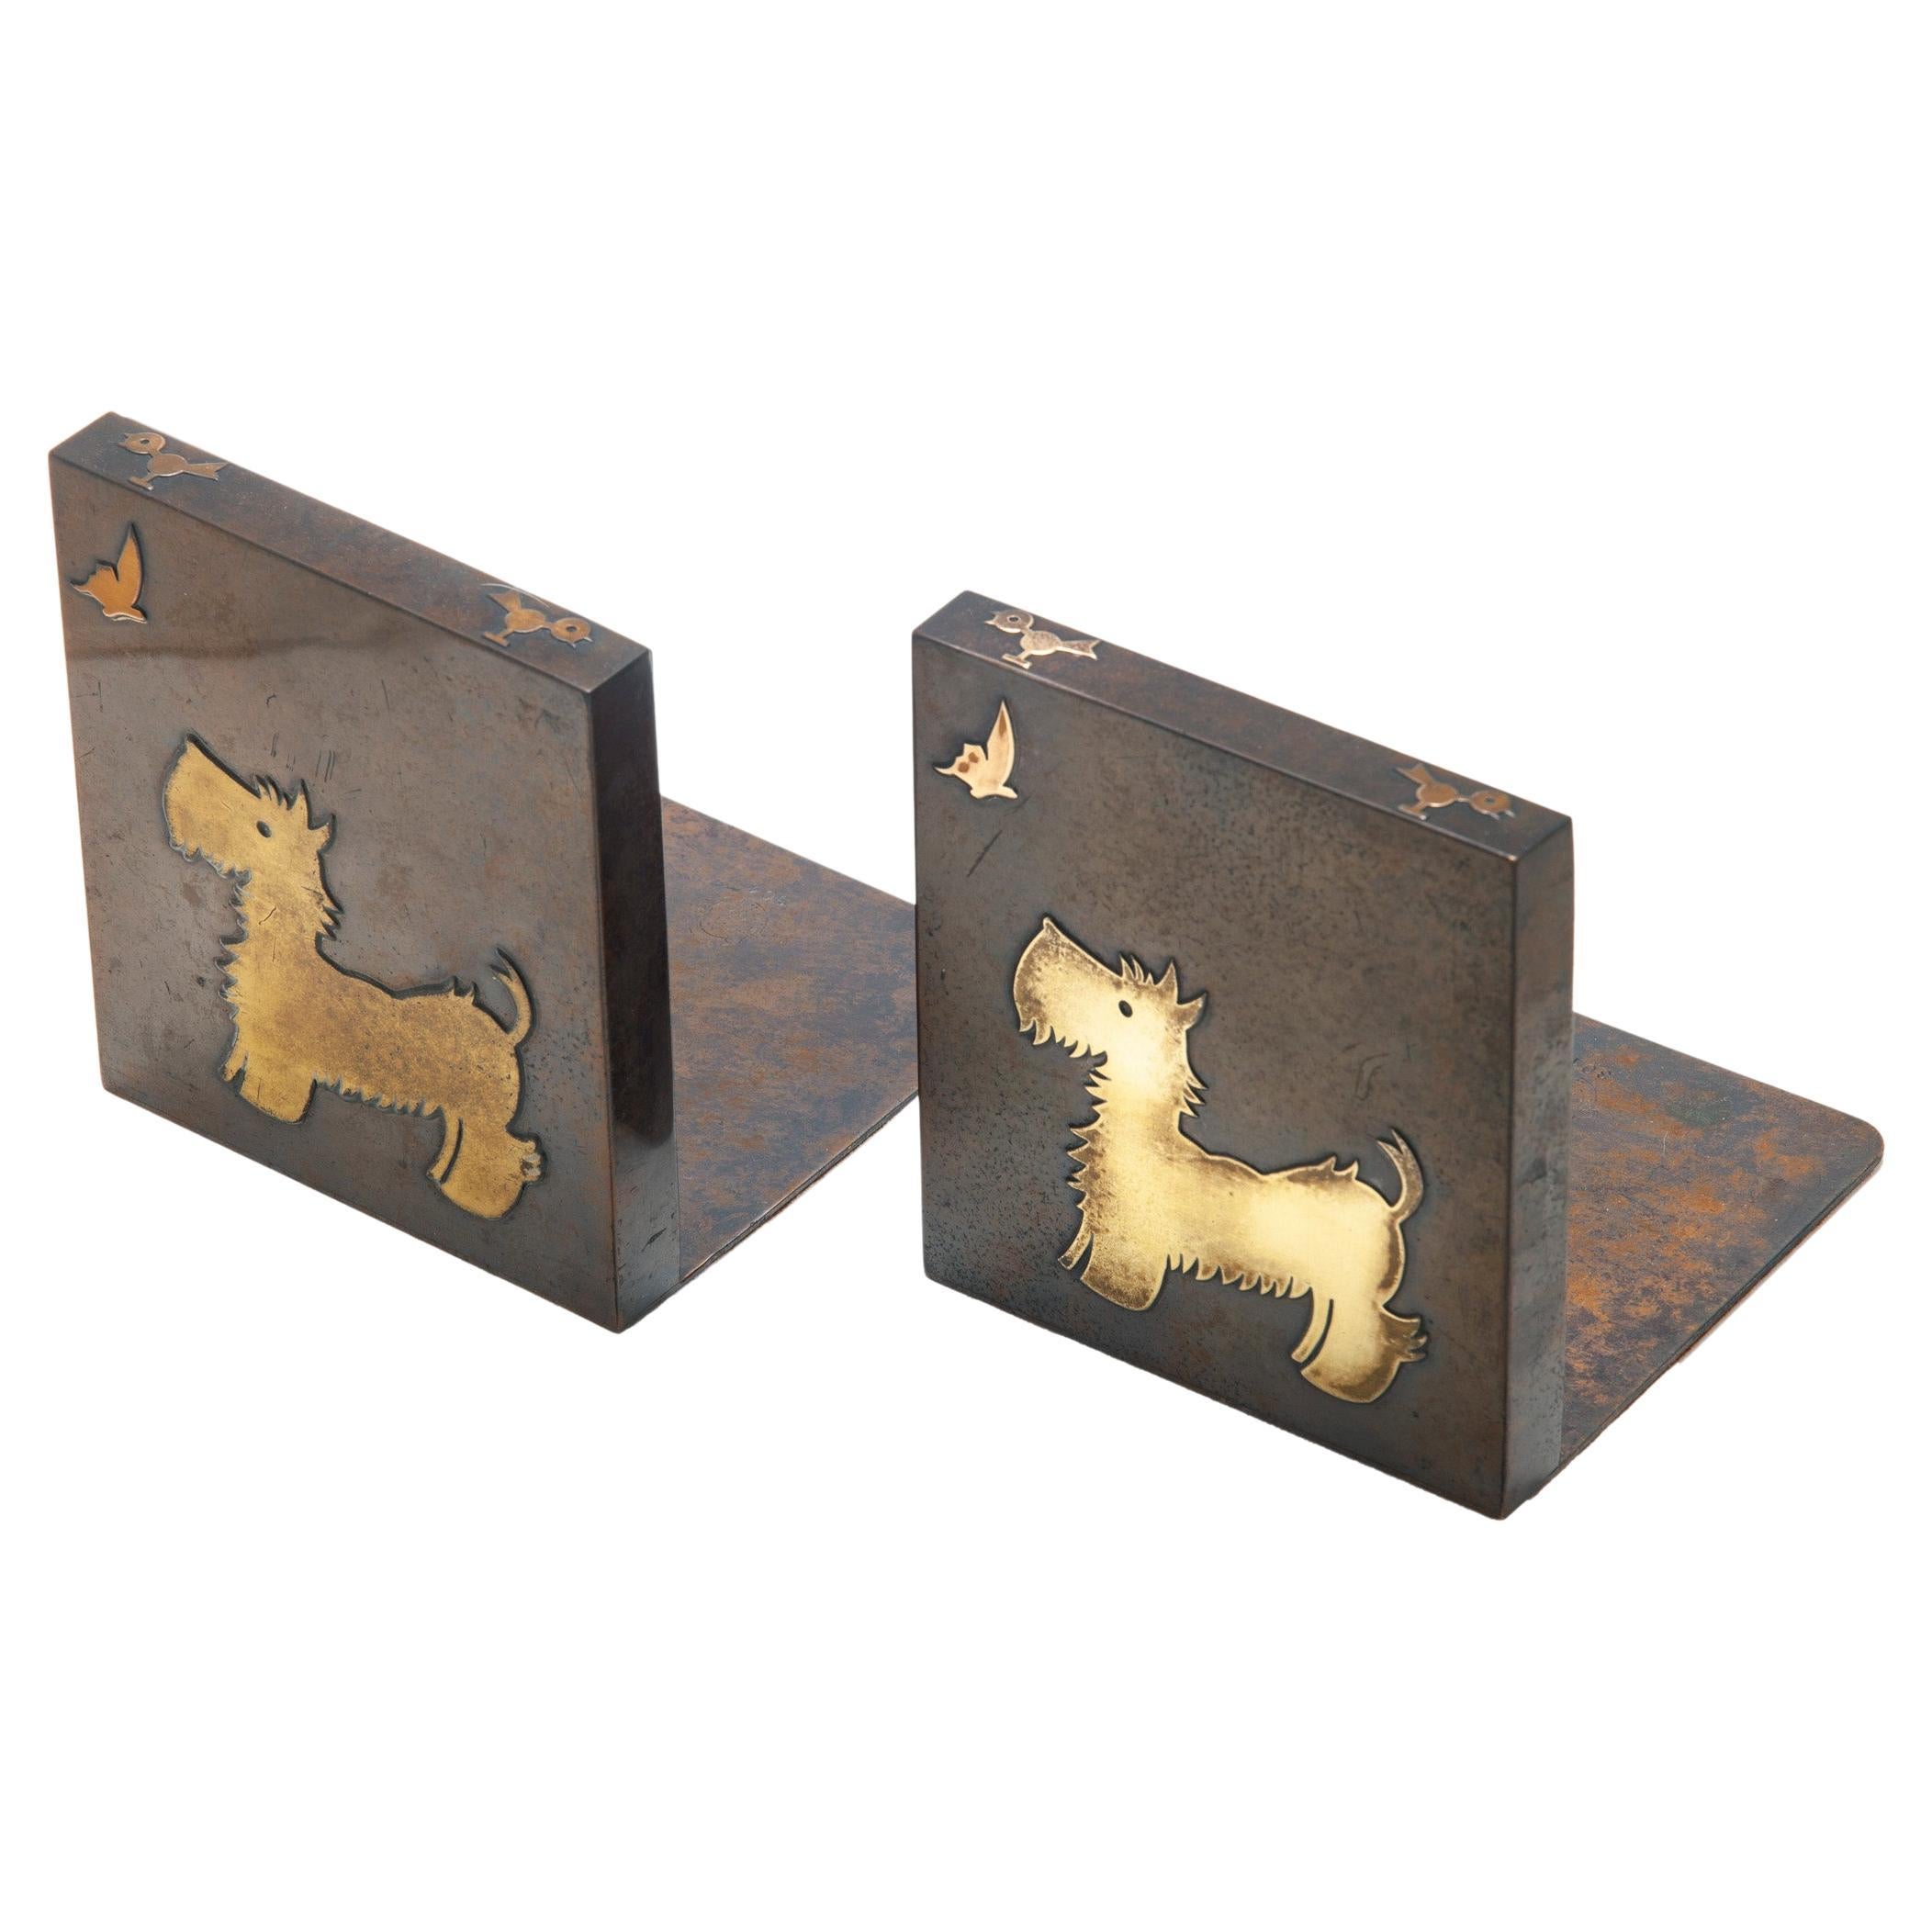 Early Silvercrest Bronze & Brazed Brass Scotty Bookends with Walnut Back, set/2
These Scotty or Westie Bookends are in bronze with brazed brass pups, whose attention is captivated by a butterfly. 
A tiny bird graces the top.
This precious image is